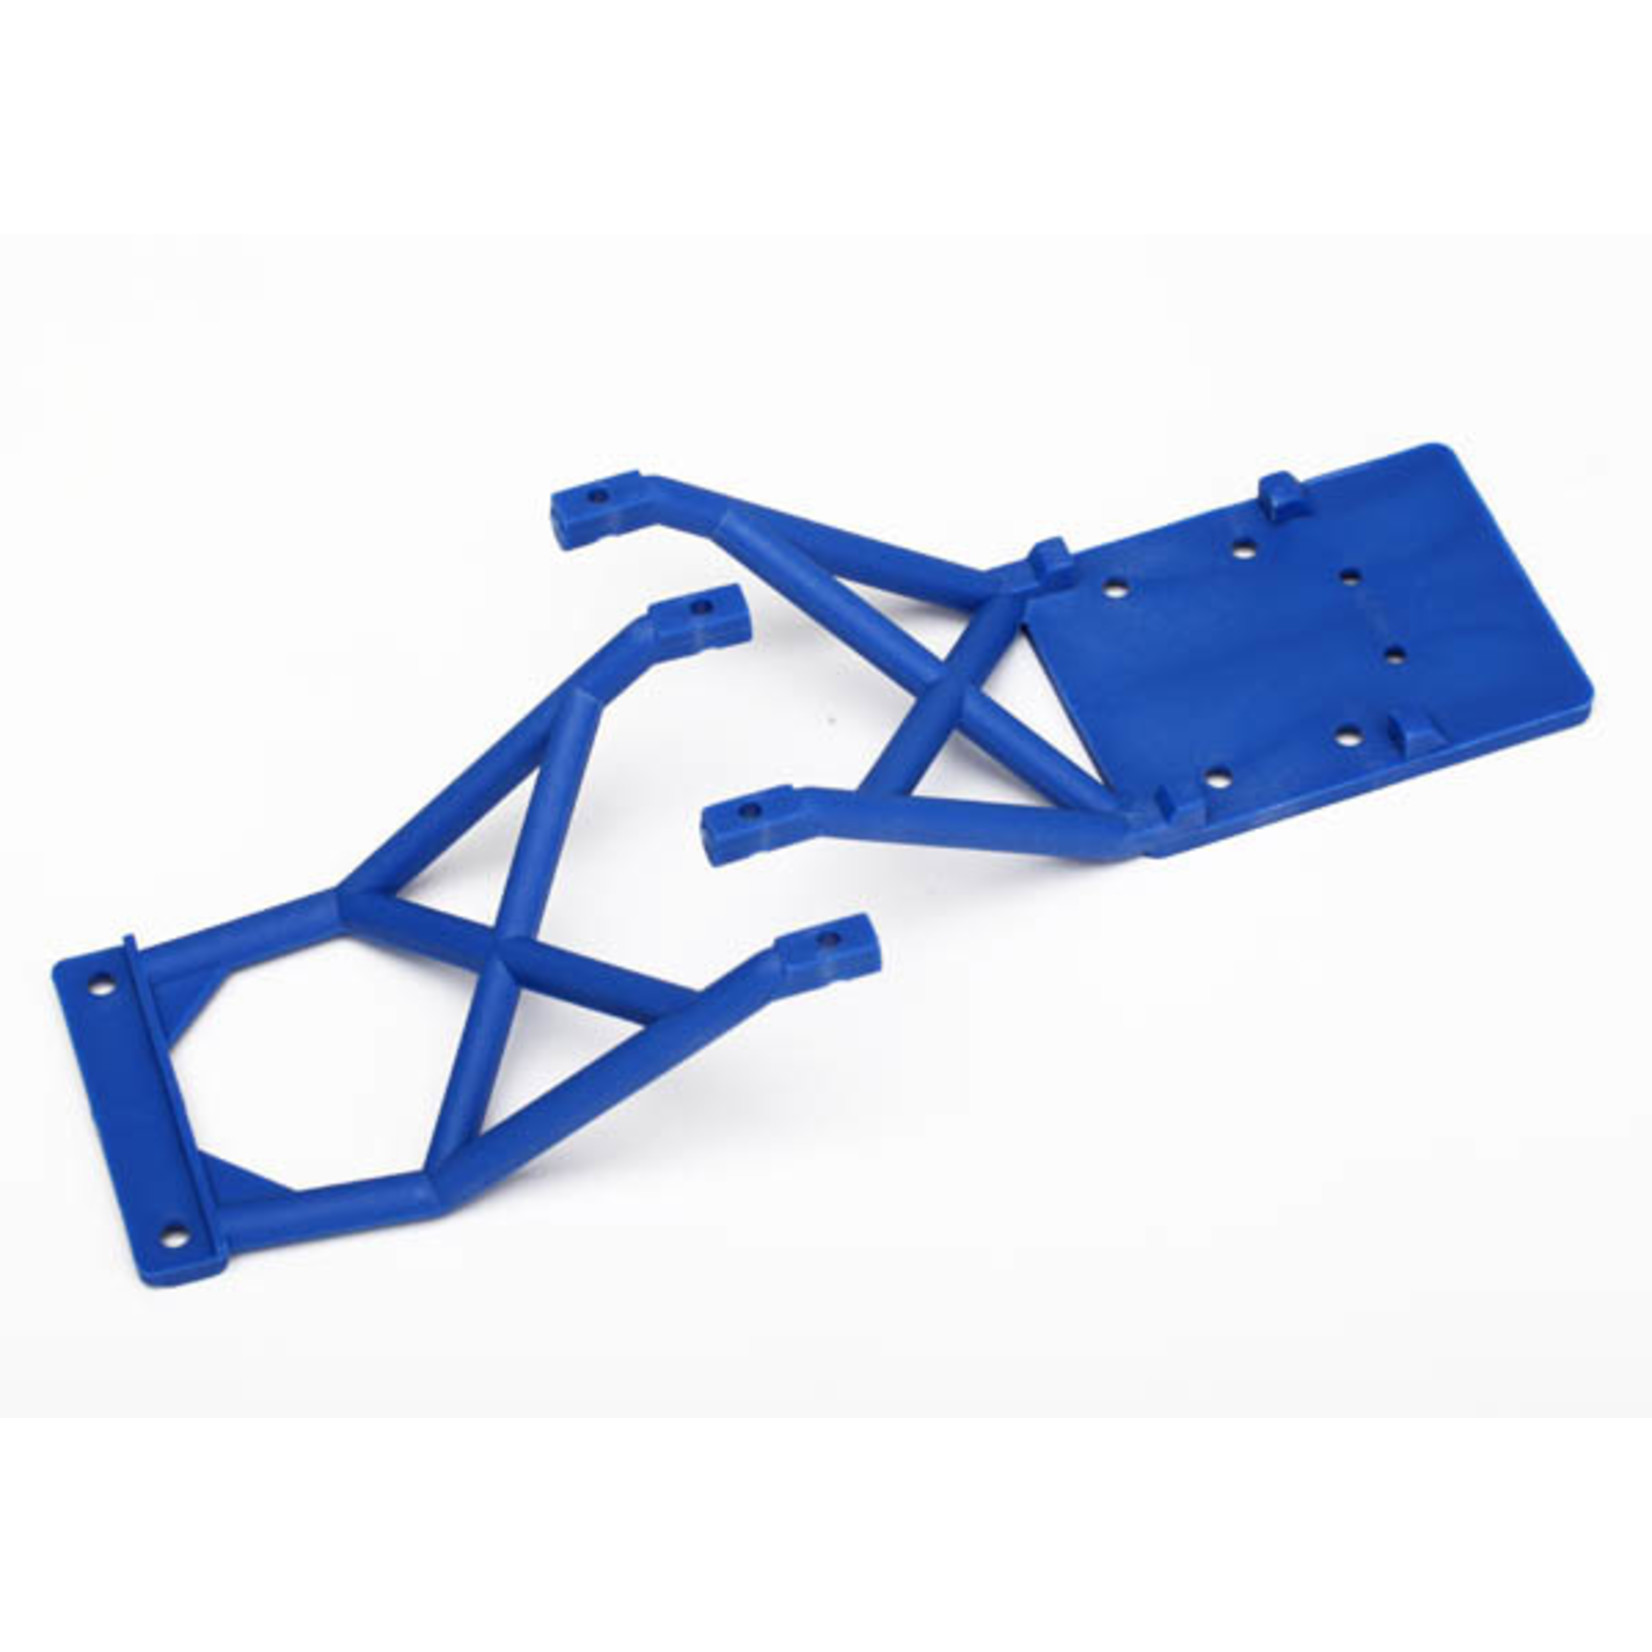 Traxxas 3623X - Skid plates, front & rear (blue)